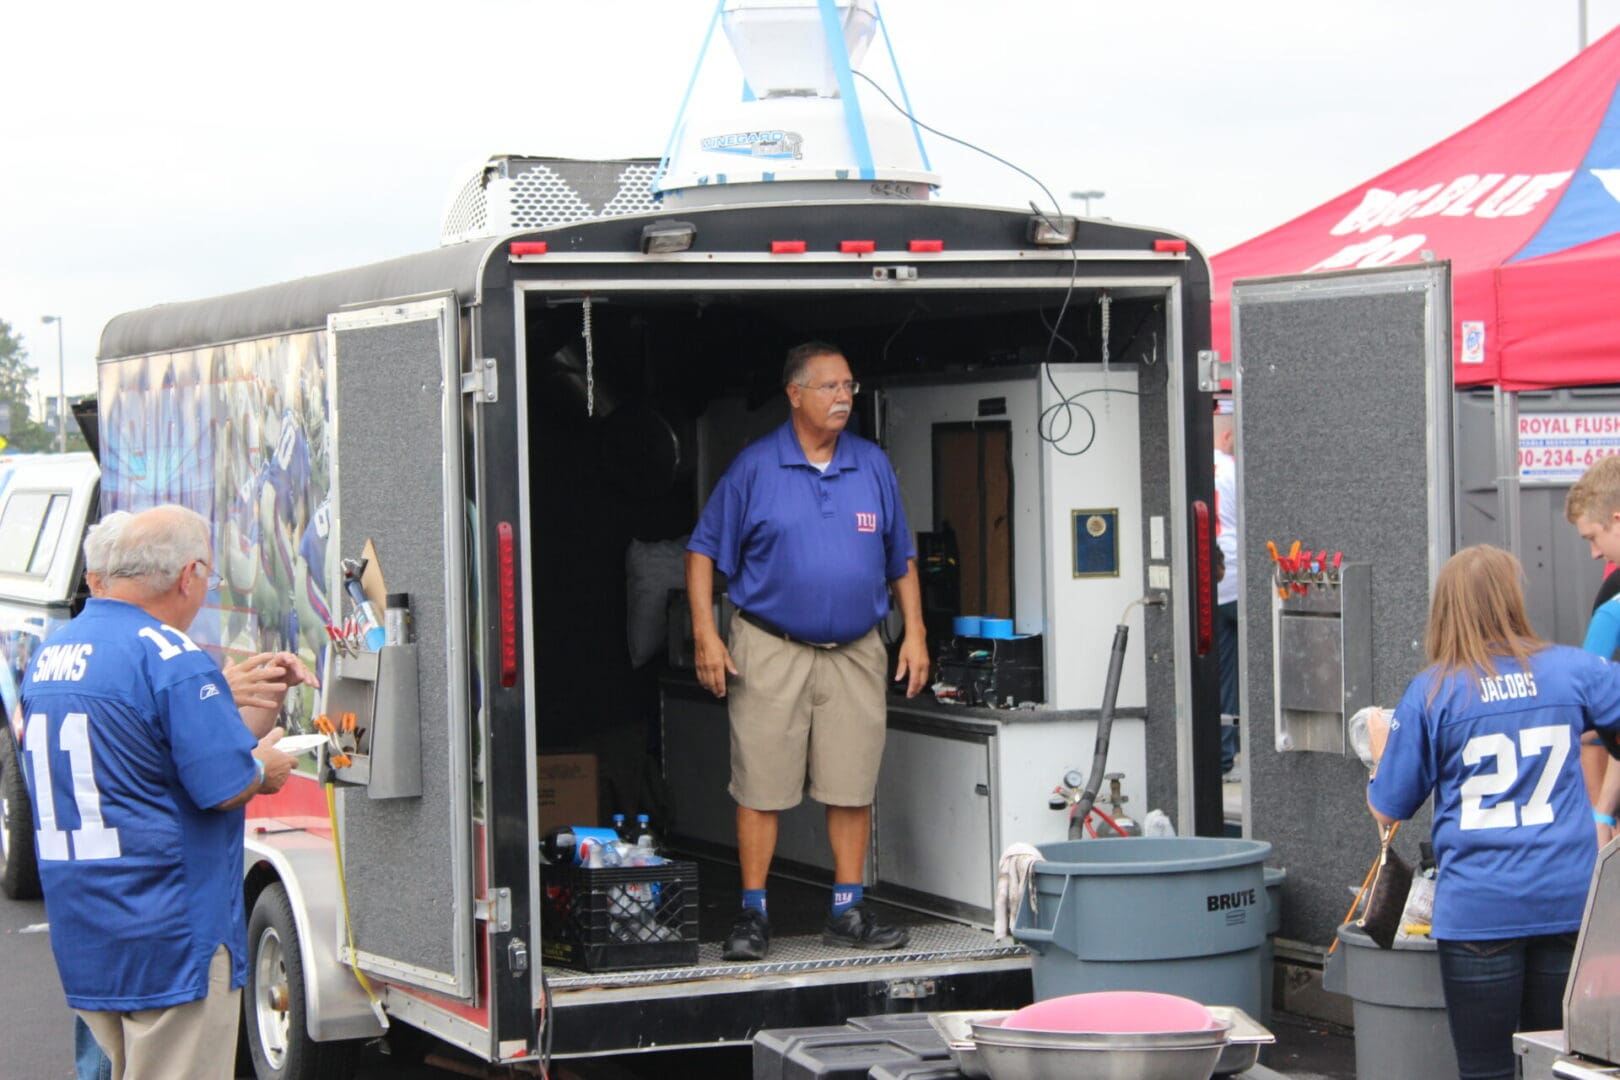 A man standing in the doorway of an enclosed trailer.